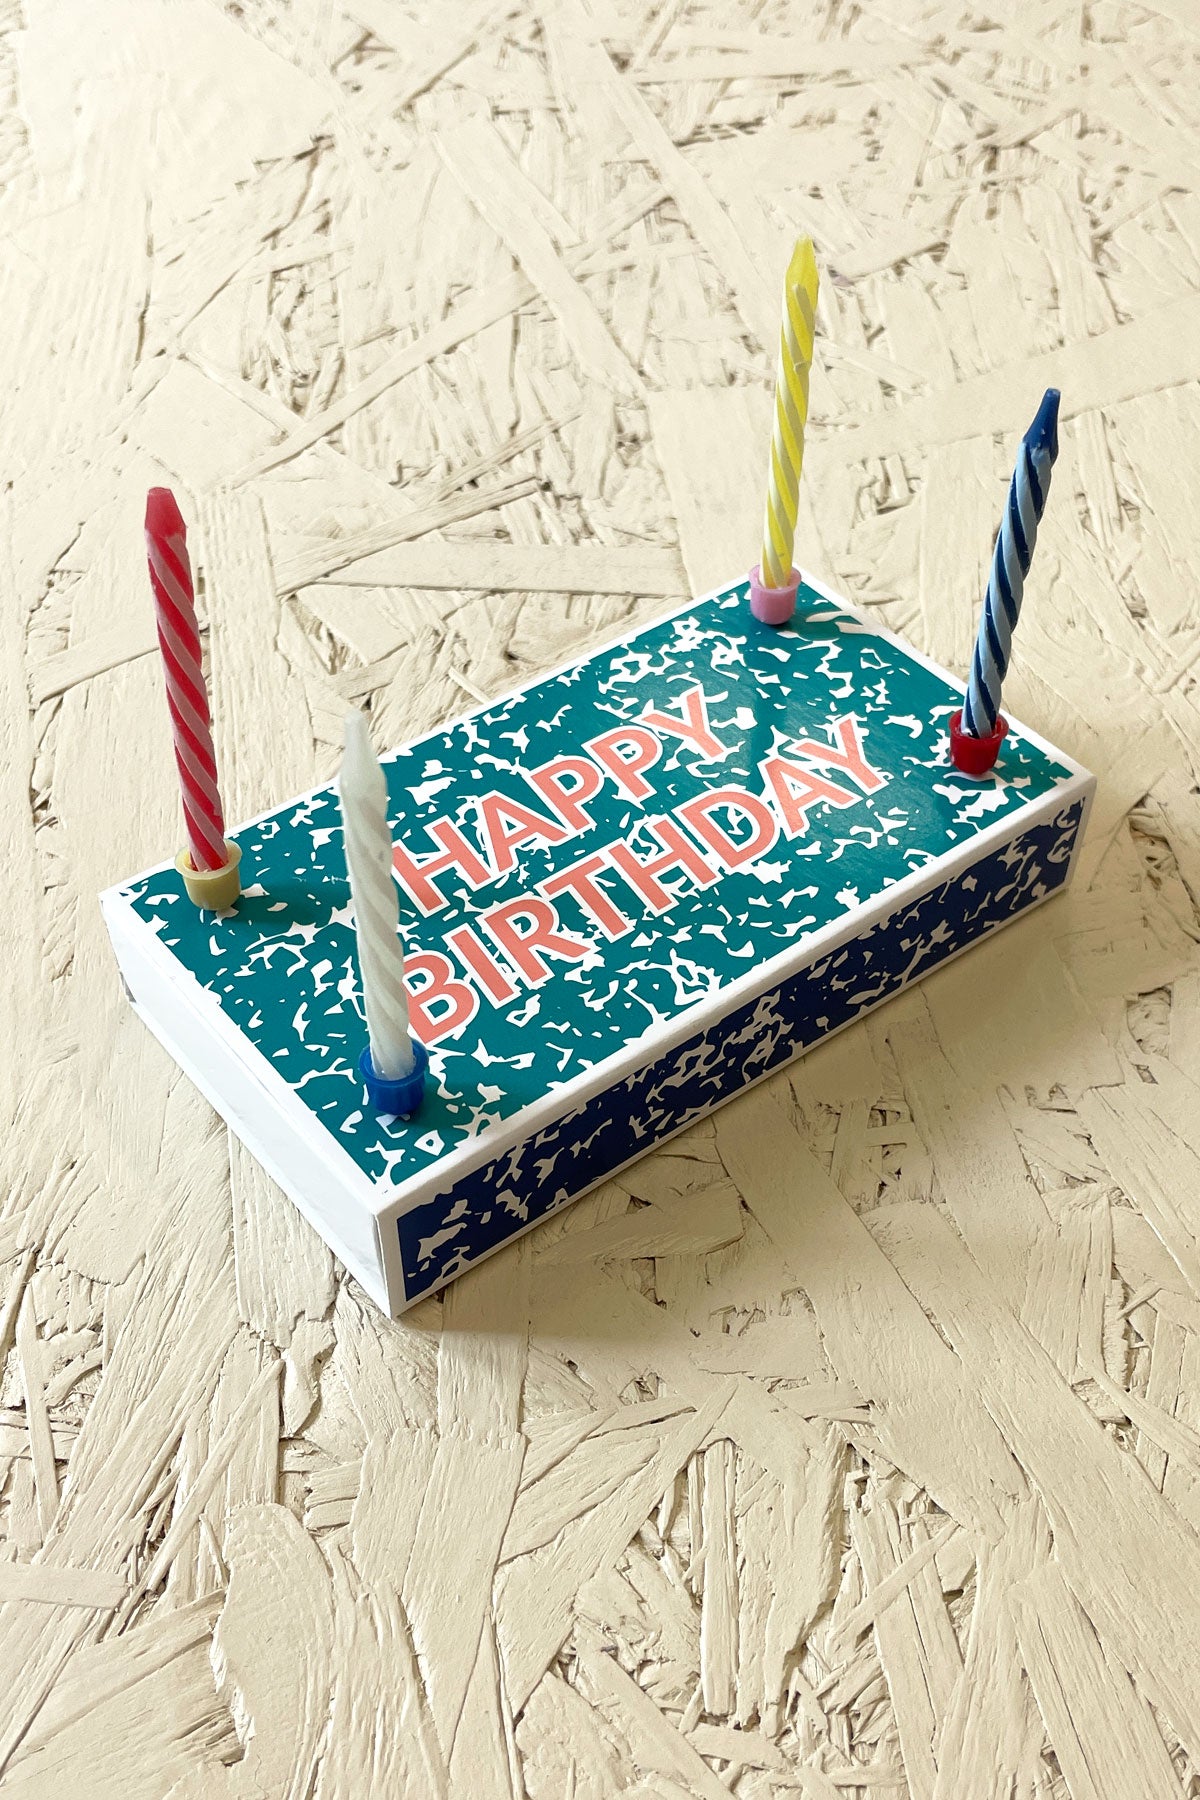 Happy Birthday matches - Coudre Berlin